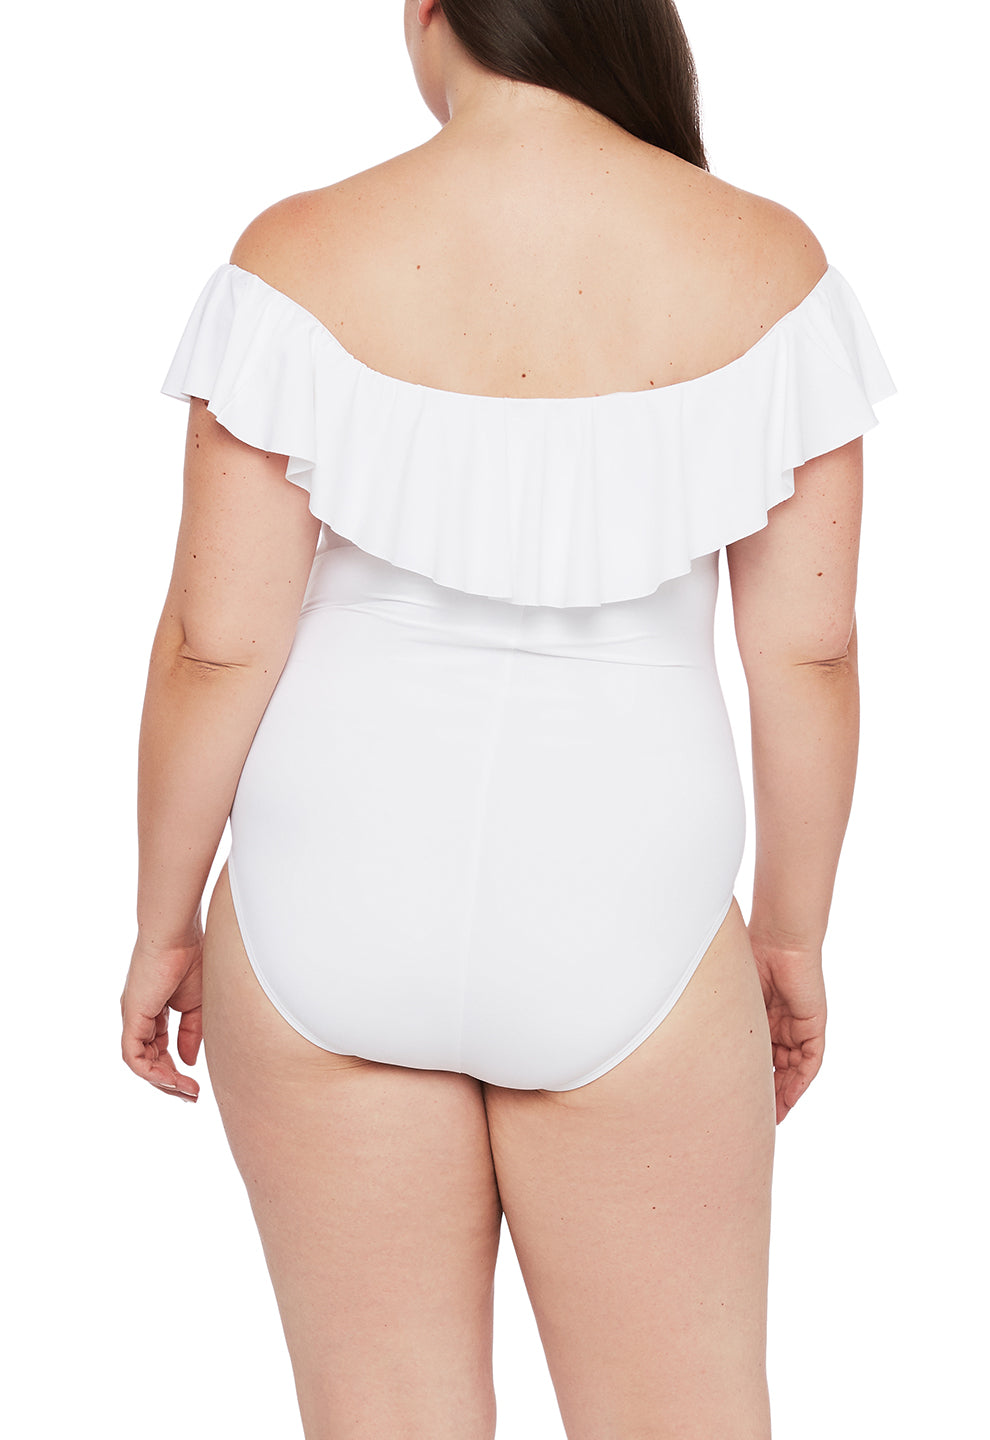 Model is wearing a white ruffle one piece swimsuit from our Best-Selling Island Goddess collection.